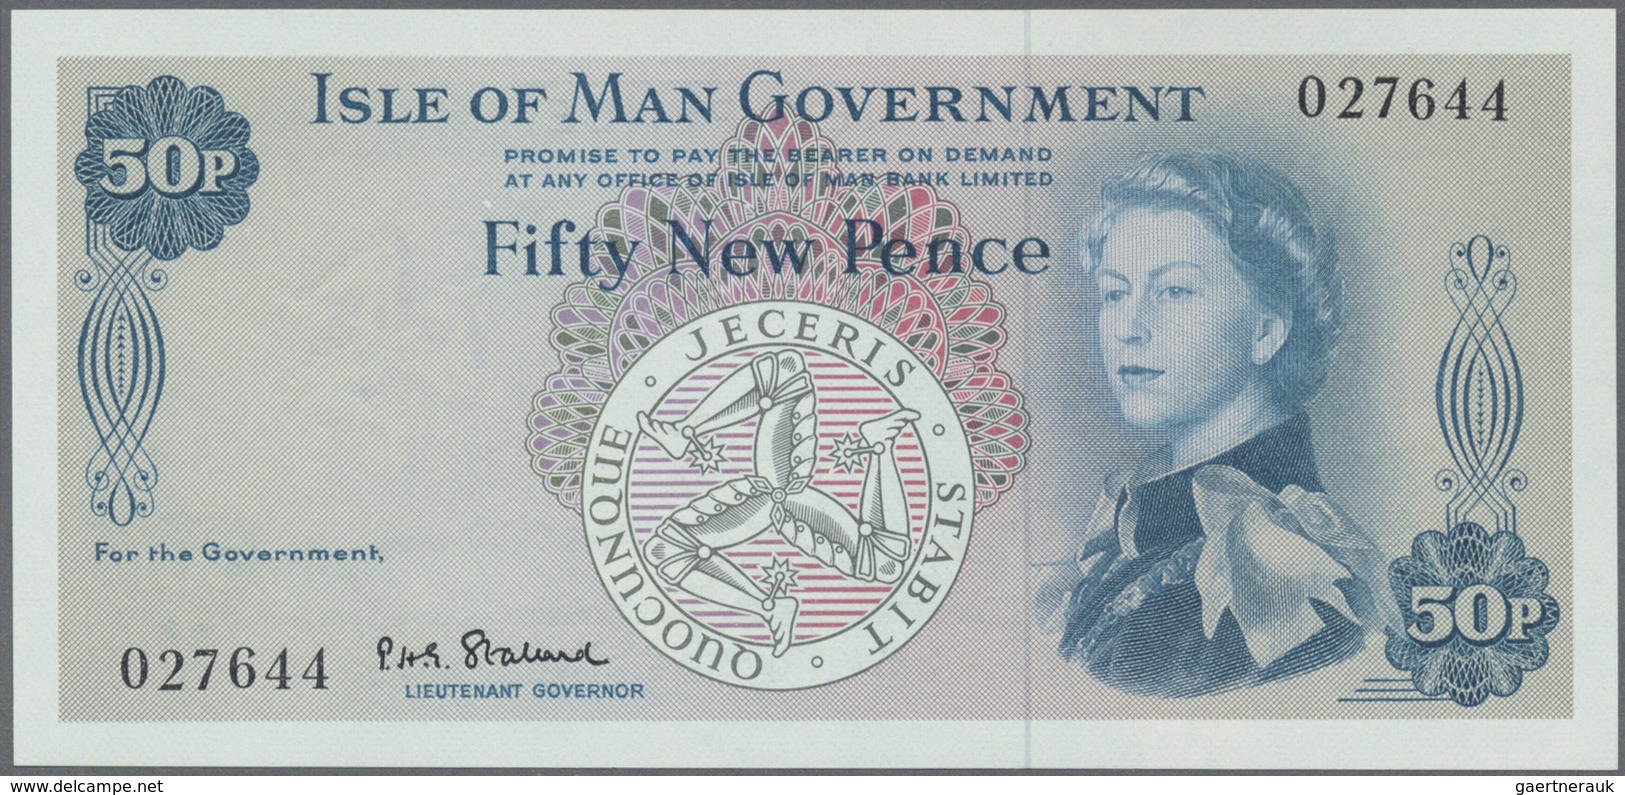 Isle of Man: Set with 9 Banknotes series 1961 – 1979 50 Pence 6x 209462, 027644, A 288550, C 553306,